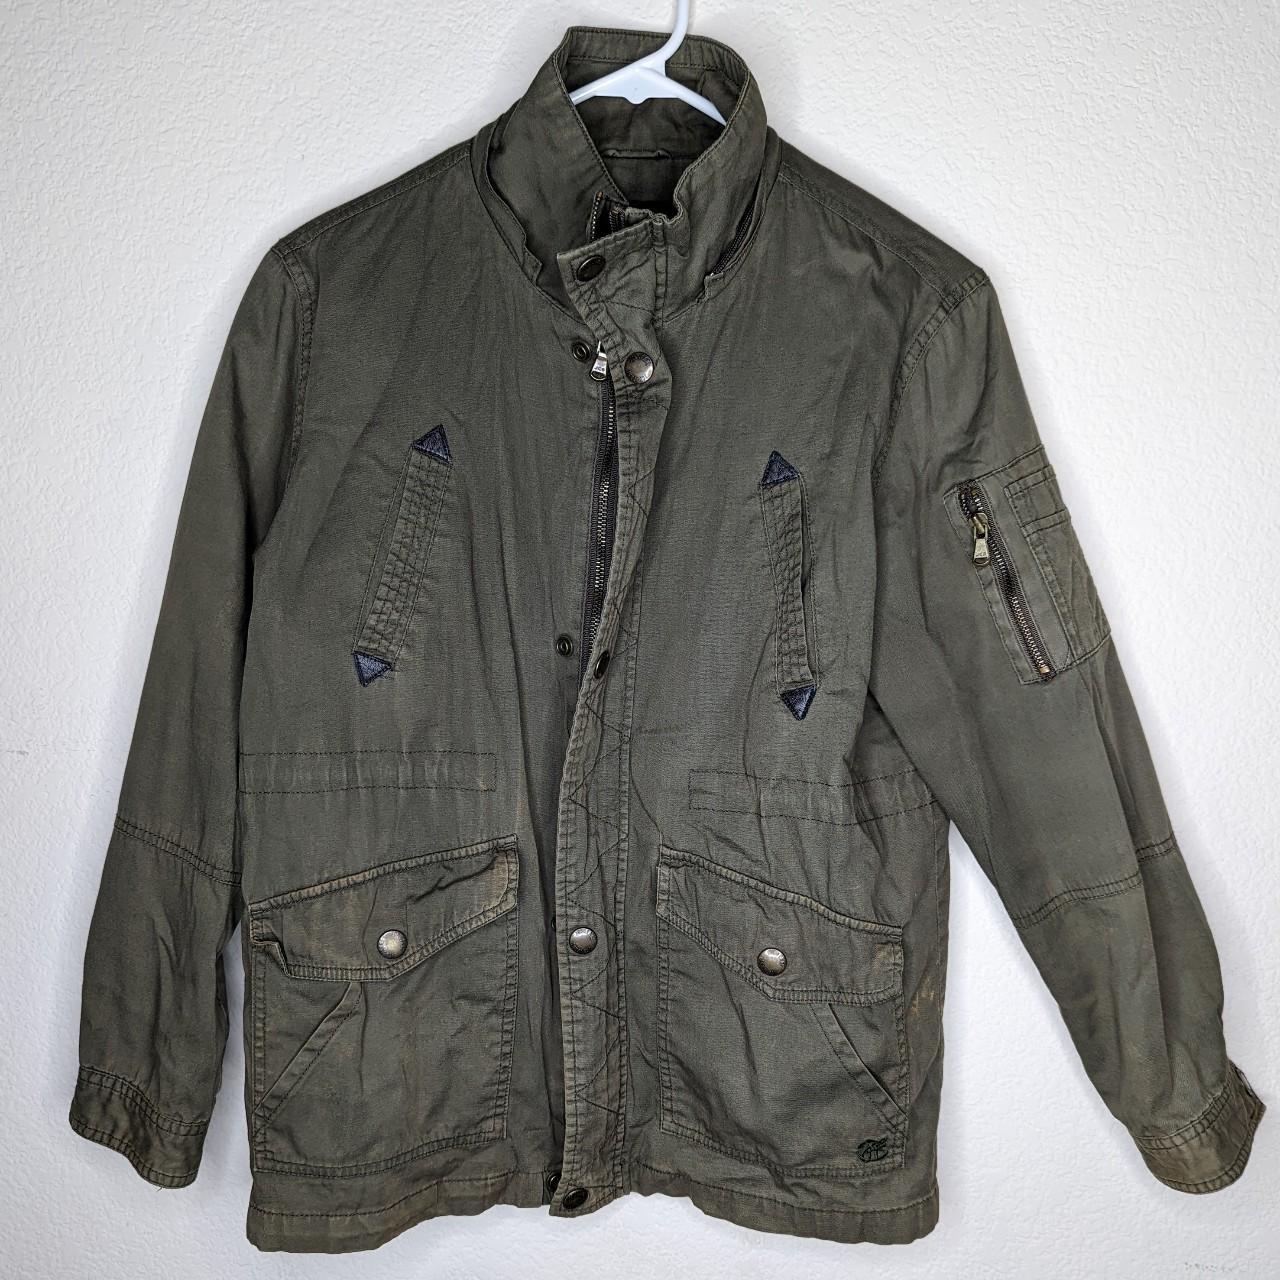 Product Image 1 - Imported military green/olive jacket or